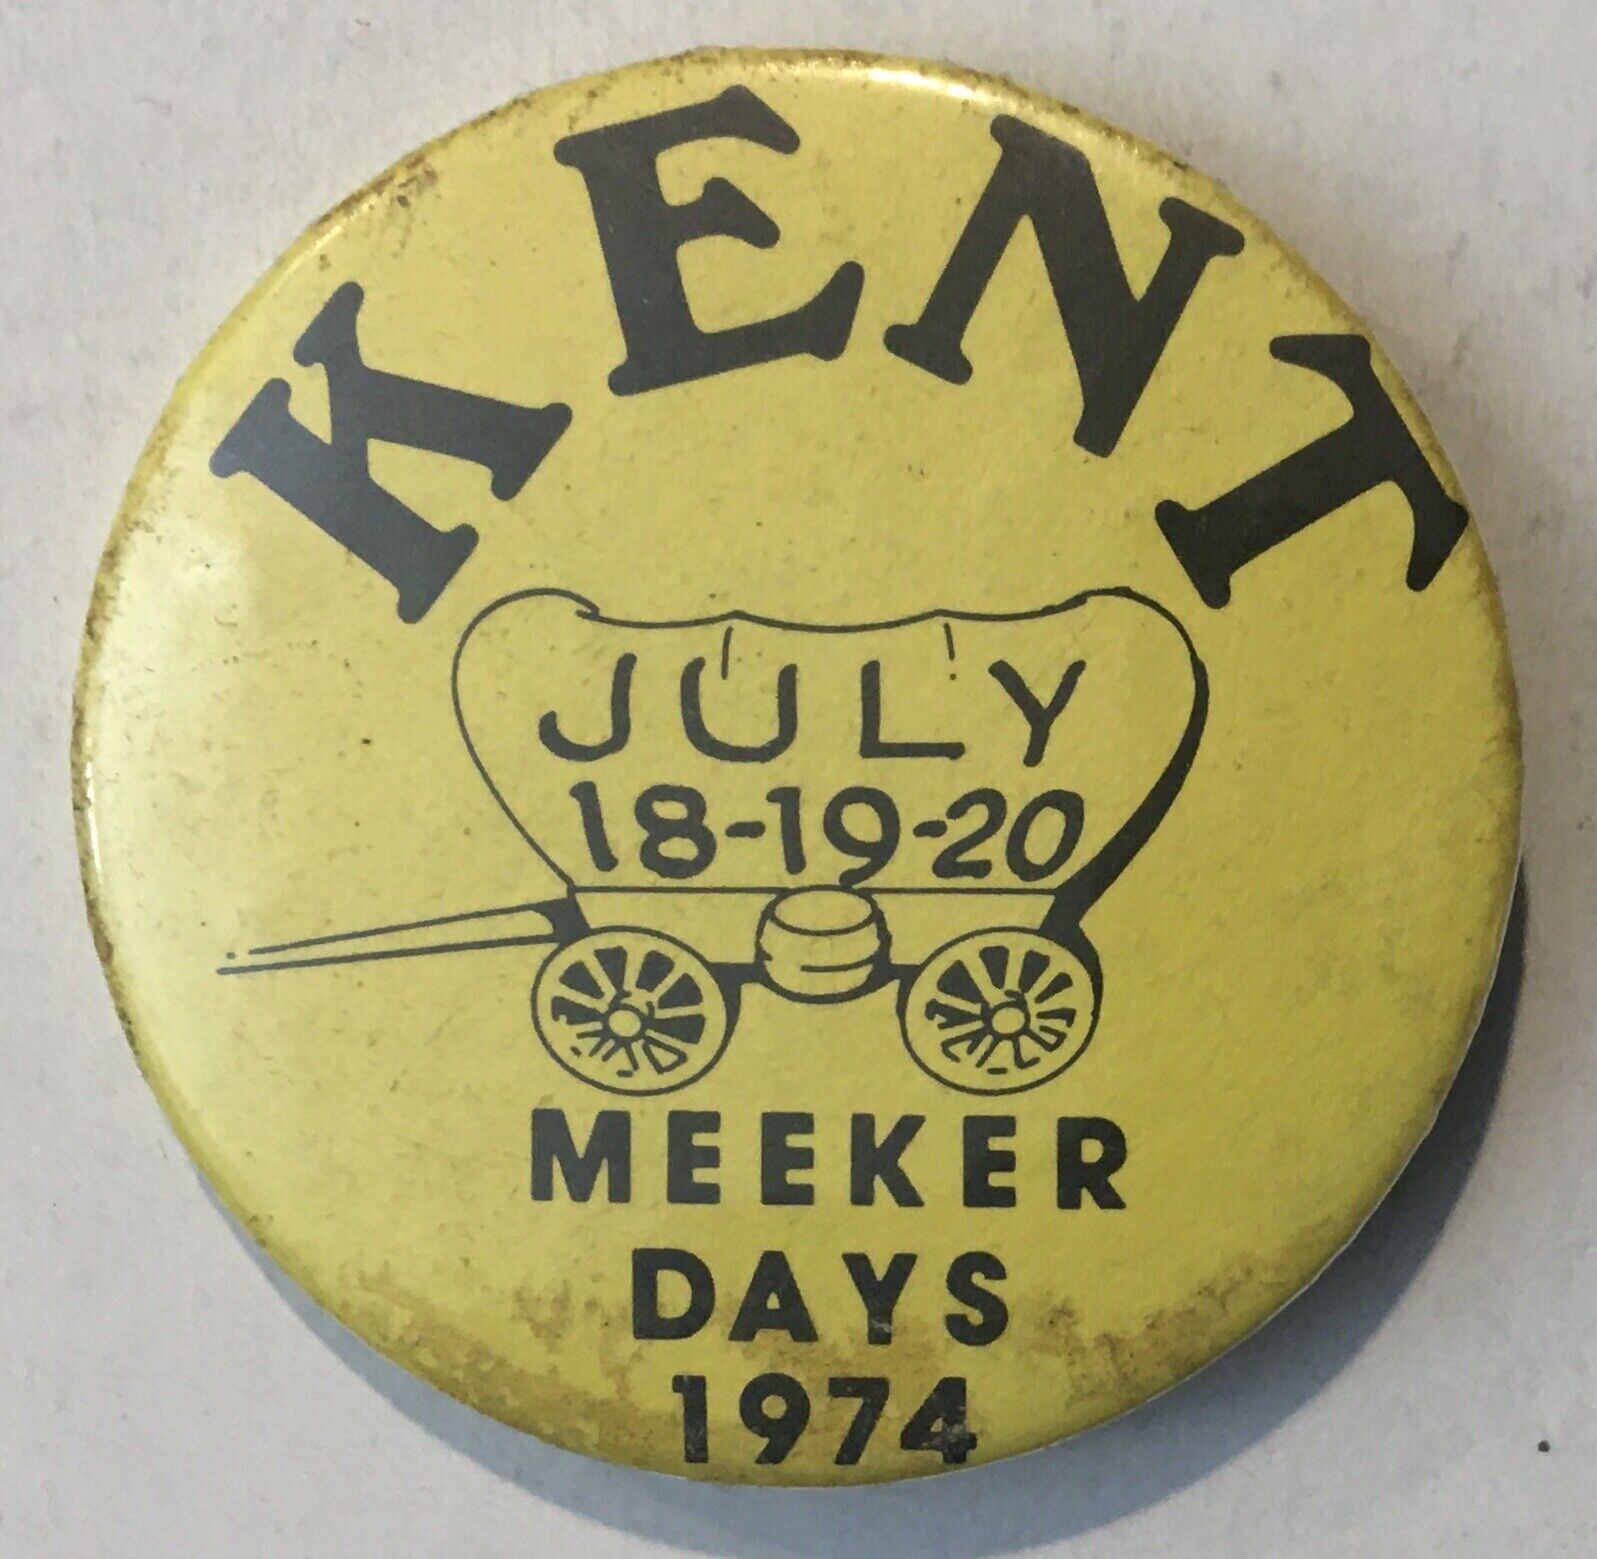 1974 Kent Meeker Days Pinback Button 2.25” Yellow Covered Wagon